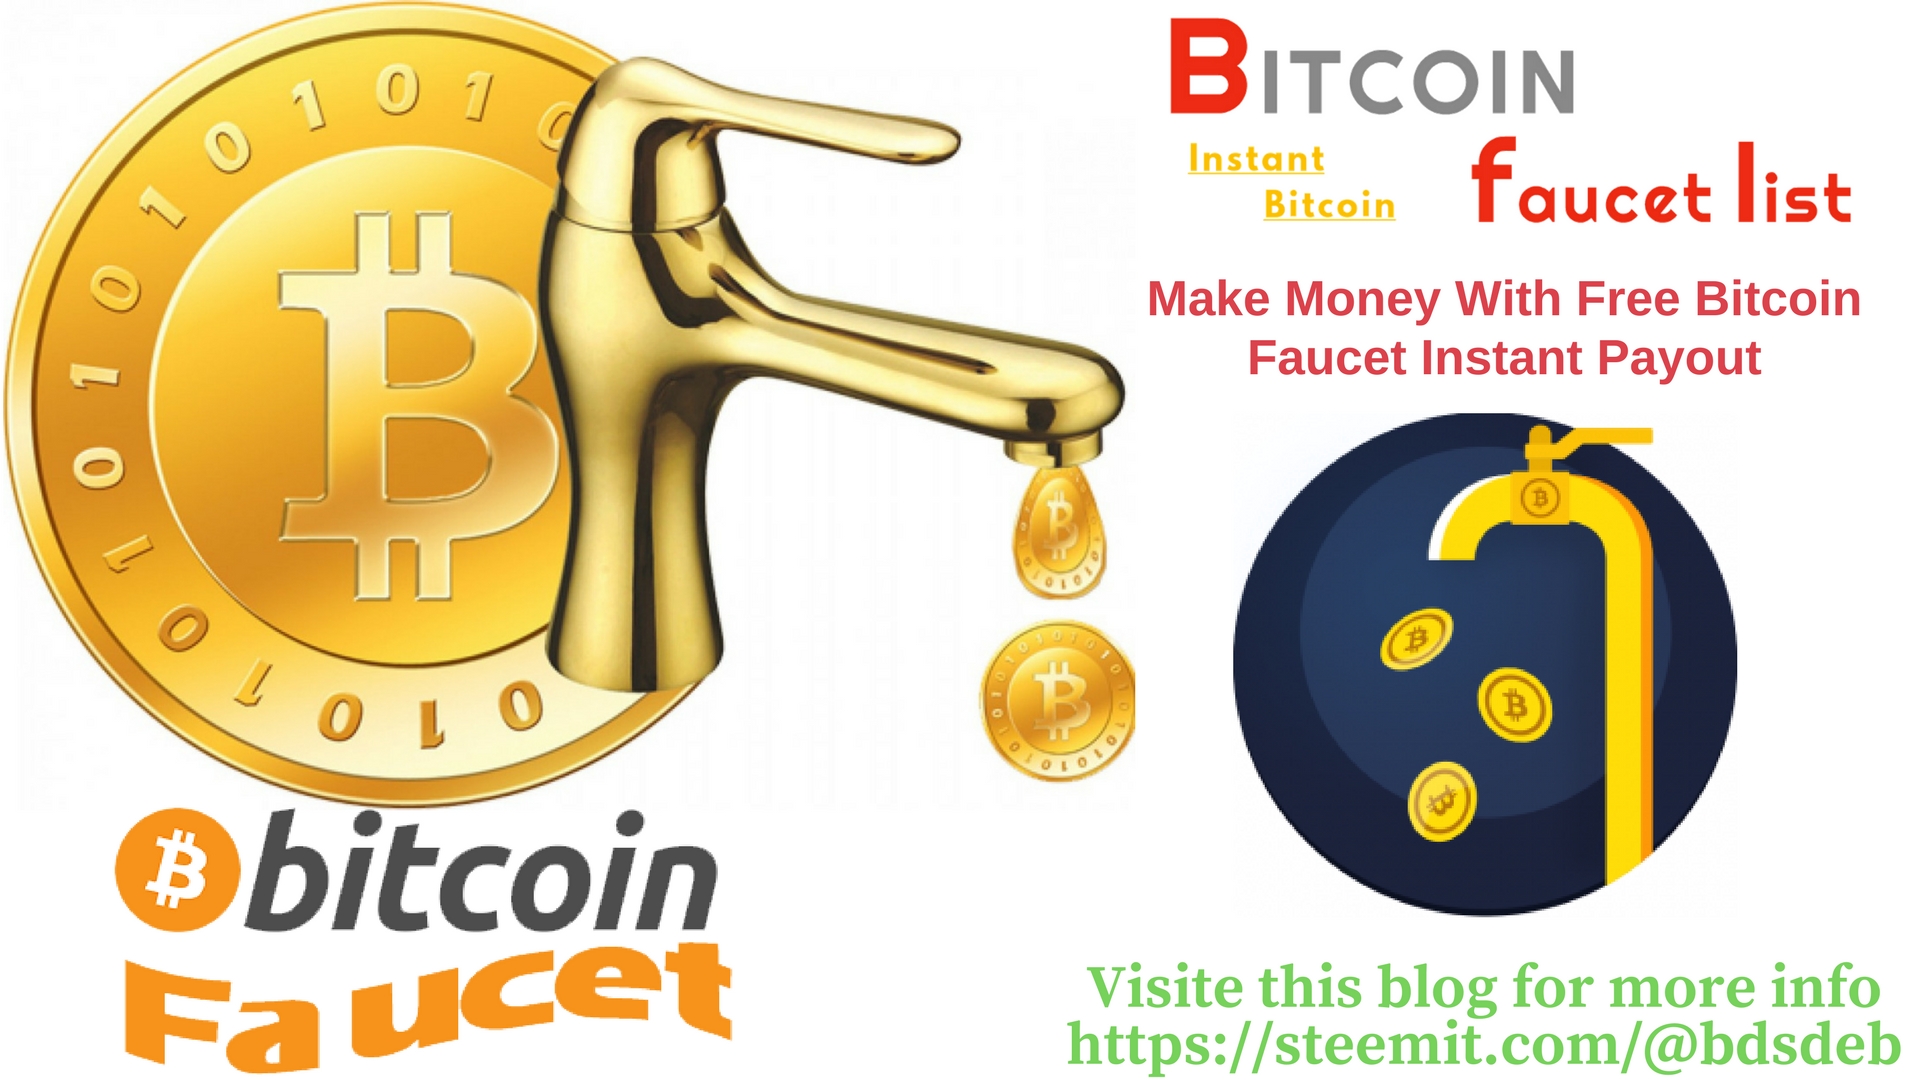 Free Bitcoin Faucet Instant Payout Best Bitcoin Faucet List Steemit